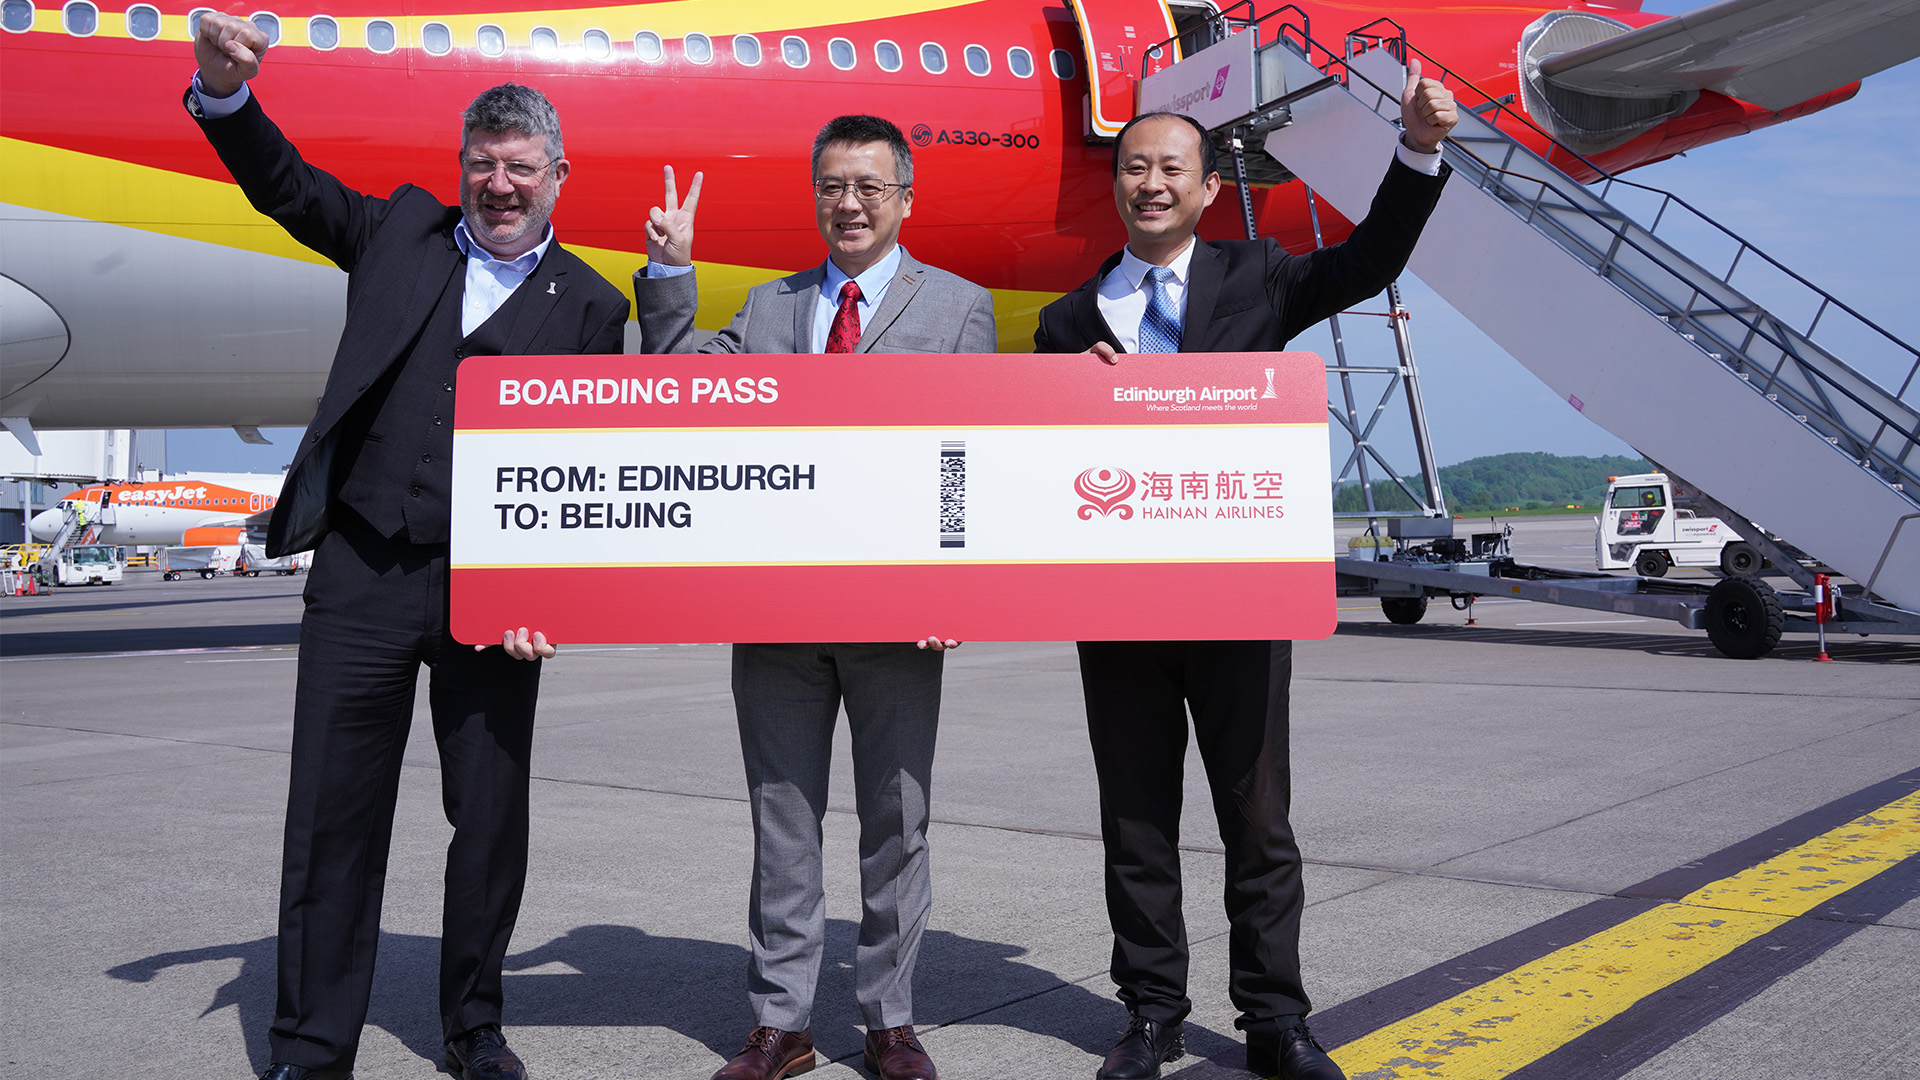 Chinese Consul General in Edinburgh Zhang Biao (M), Chief Executive of Edinburgh Airport Gordon Dewar (L), and director of Hainan Airlines in the UK & Ireland Han Zhi (R) attended an event celebrating the resuming of the direct flights from Beijing to Edinburgh at Edinburgh Airport. /CGTN